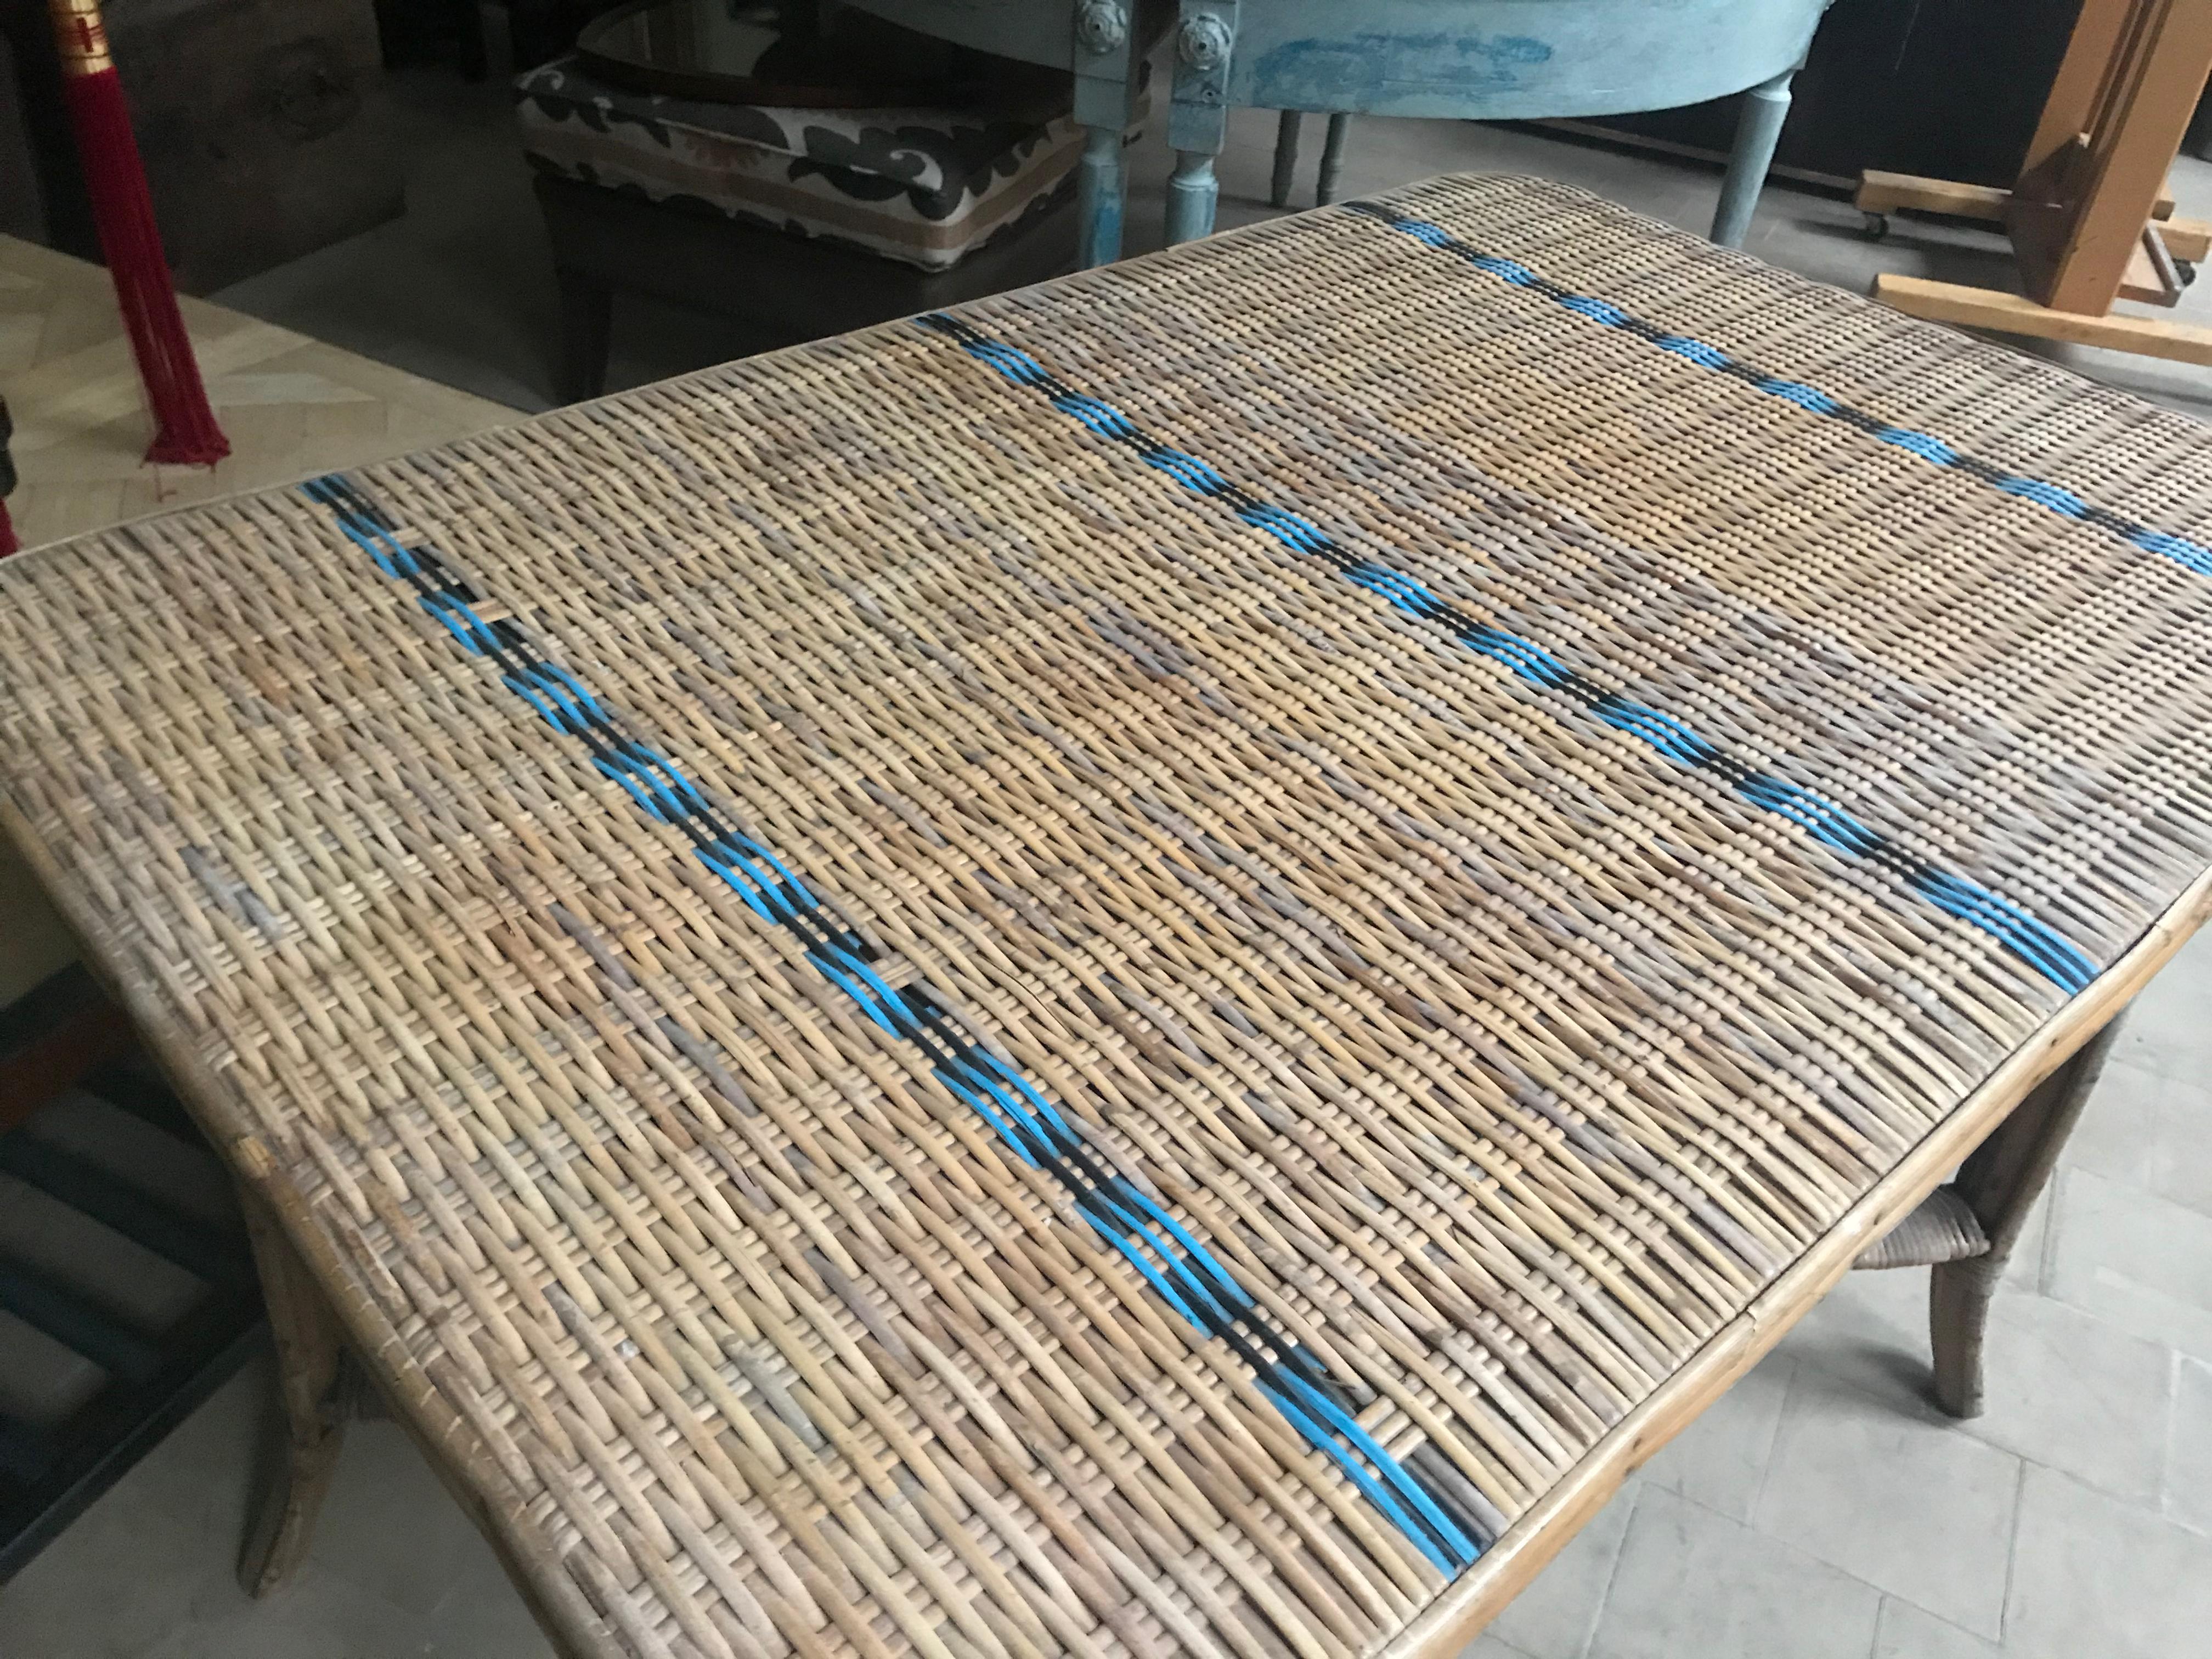 A vintage circa 1920 French woven rattan table. Woven in natural split reed with blue painted reed stripes. Exceptional craftsmanship and design, having a sturdy bamboo frame with x-pattern stretcher and tightly woven tabletop.